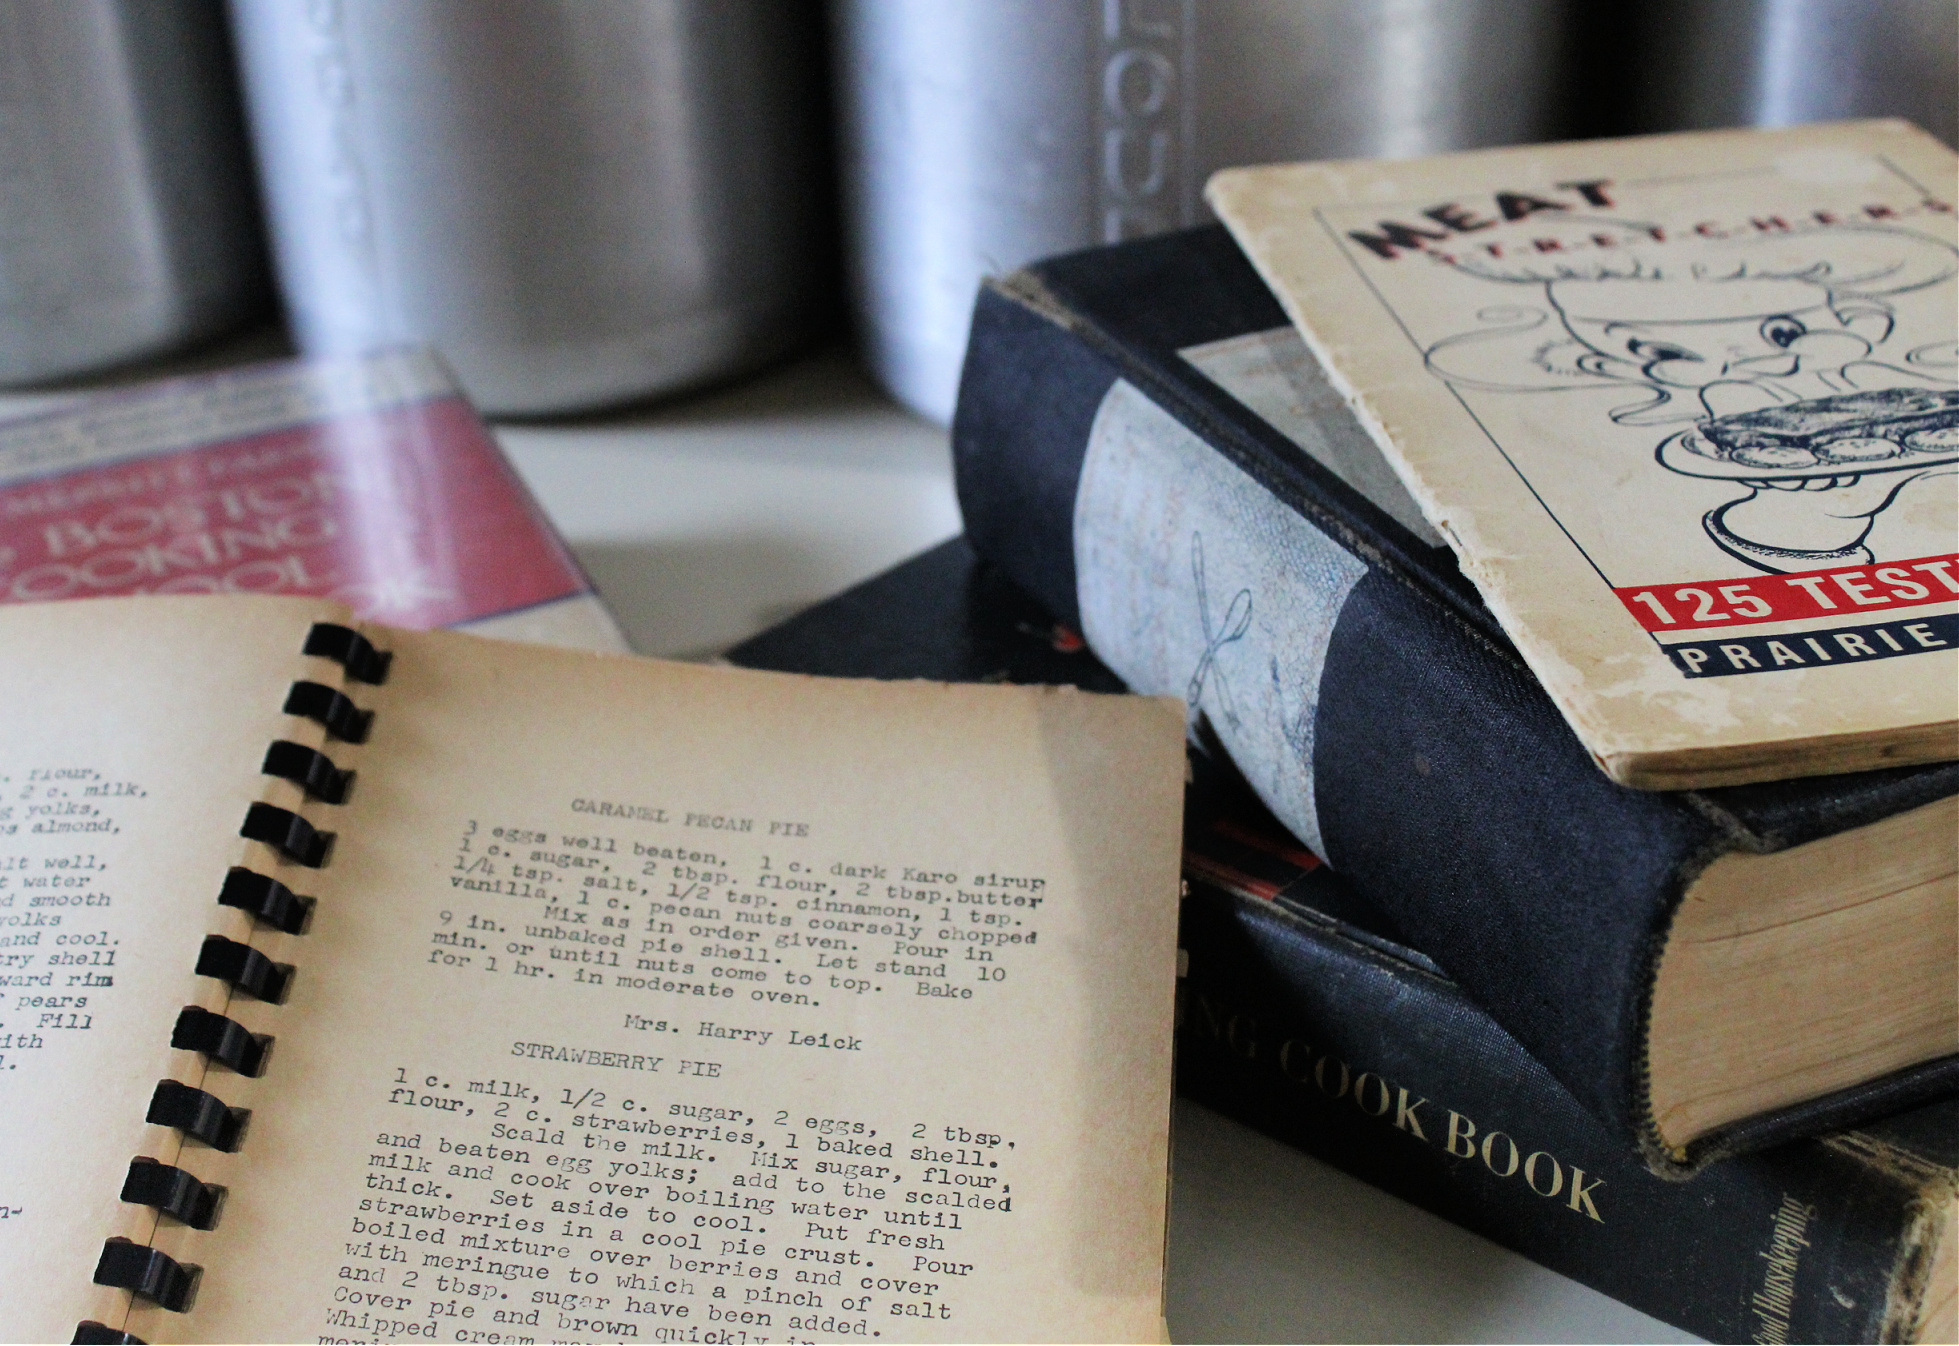 I love old cookbooks and here’s why